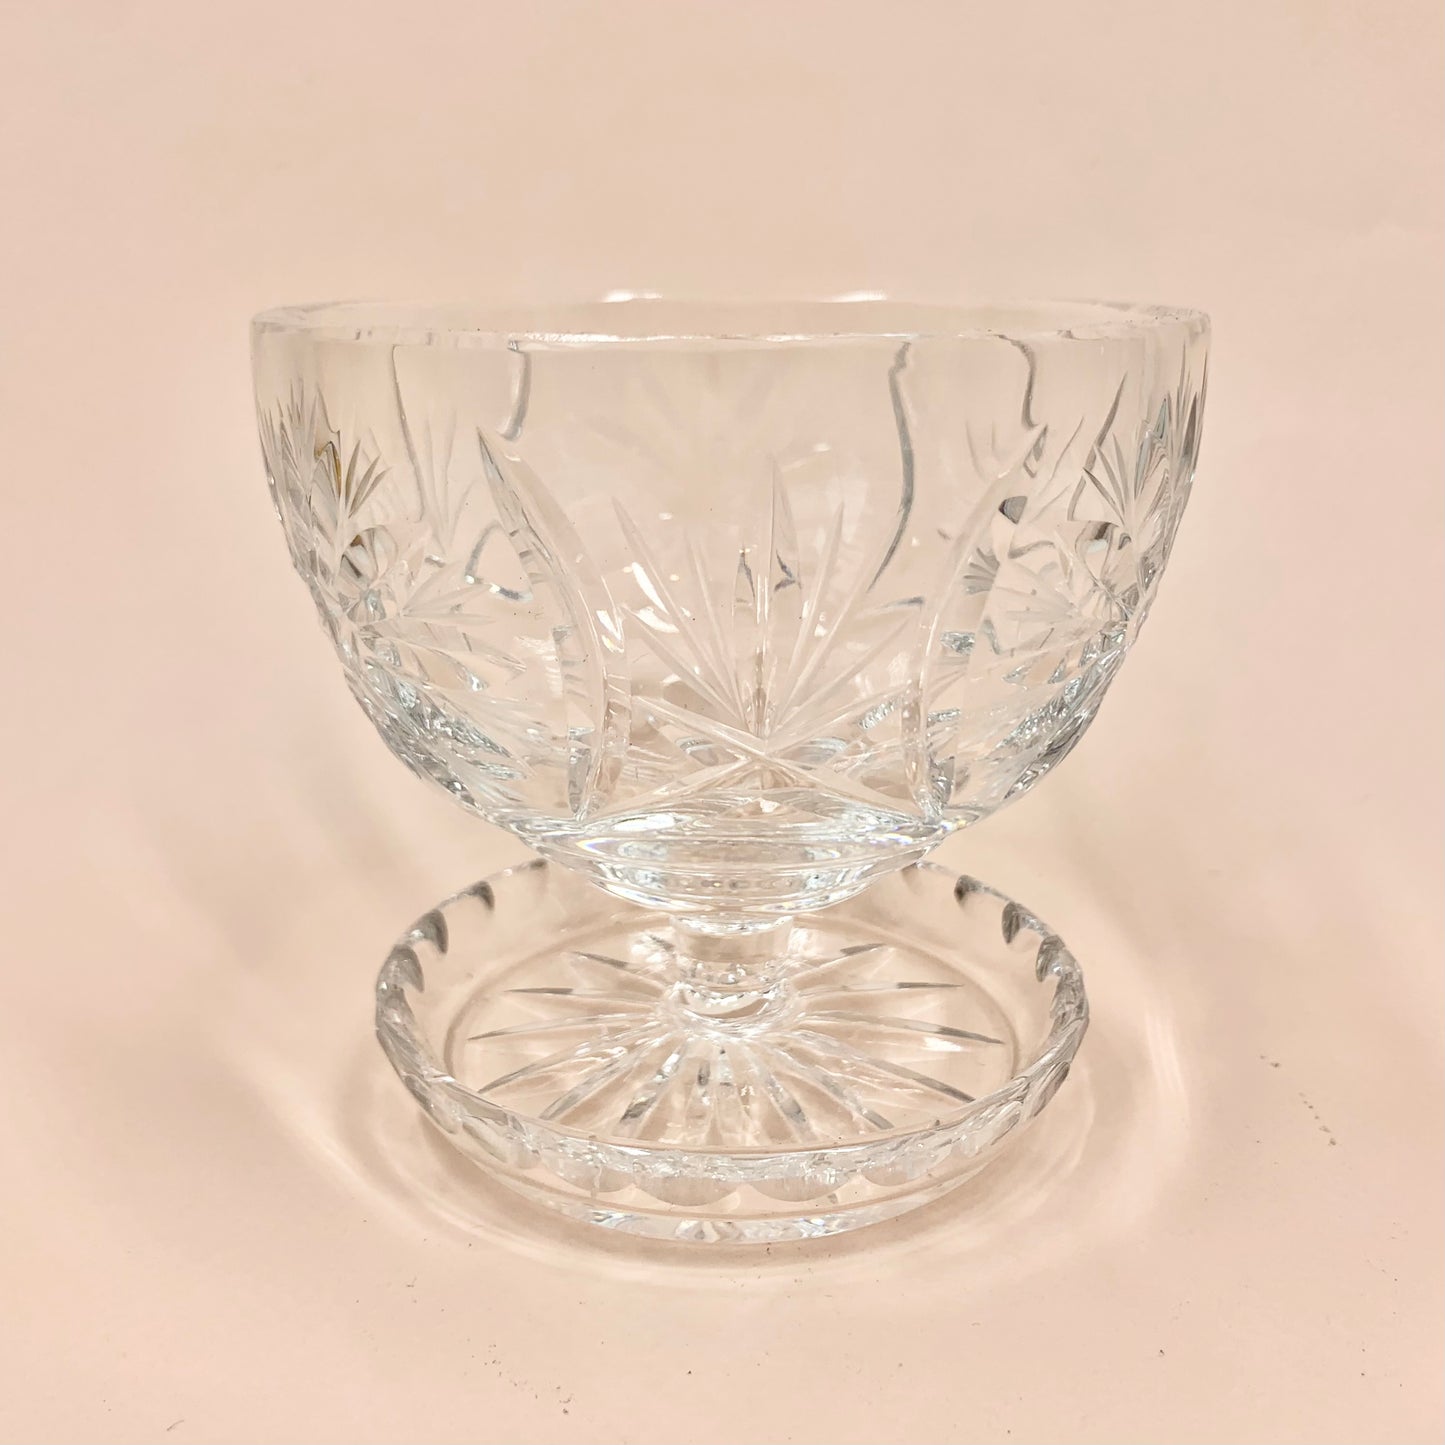 Extremely rare antique American Brilliant era hand crystal dessert coupe